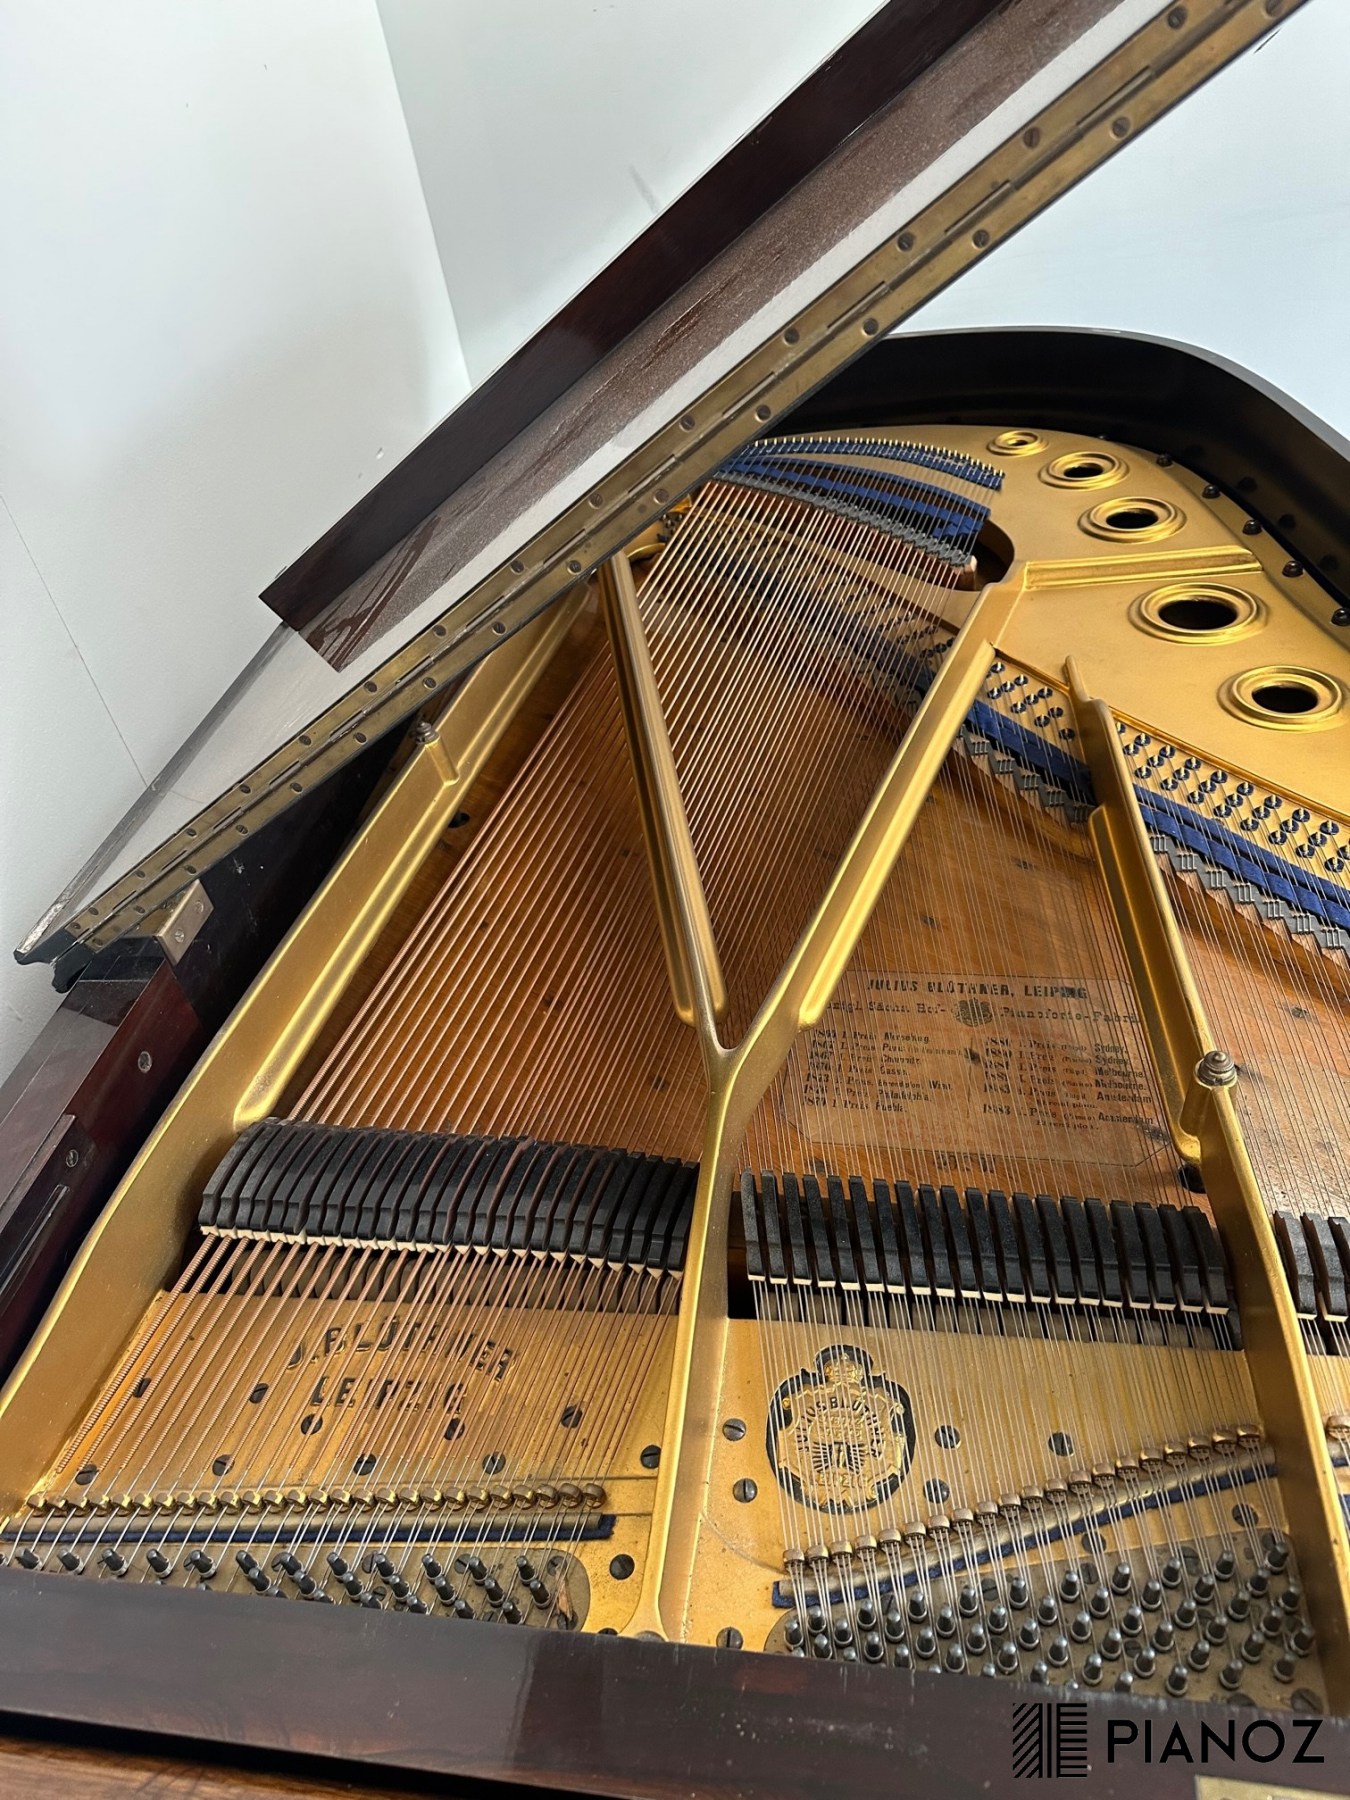 Bluthner 6ft Restored Grand Piano piano for sale in UK